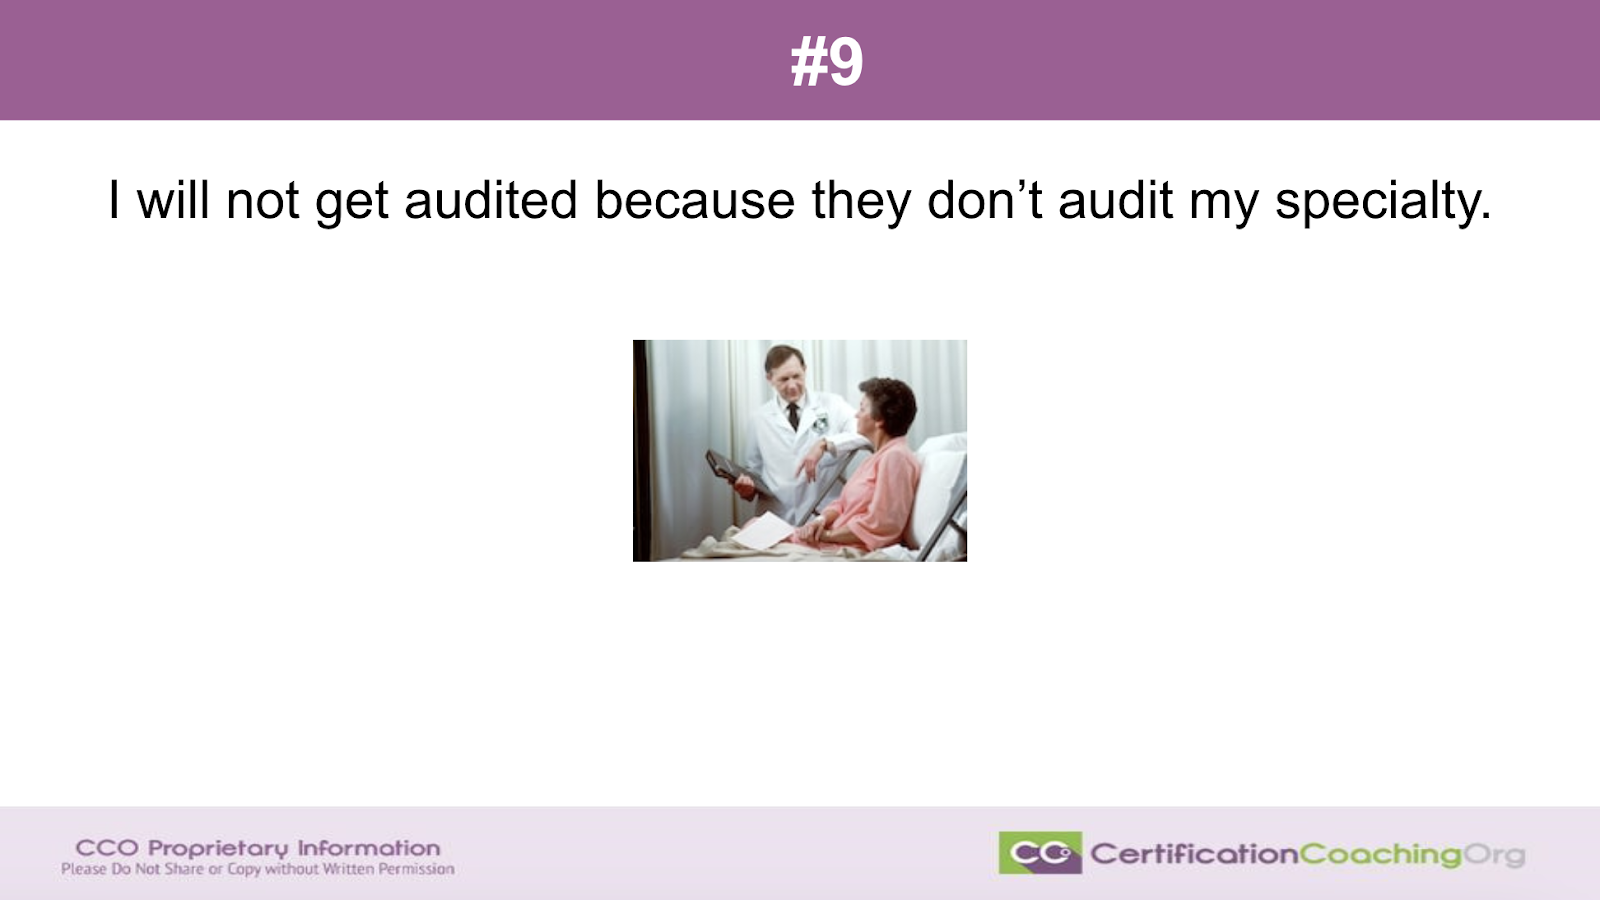 #9 I Will Not Get Audited Because They Don't Audit My Specialty